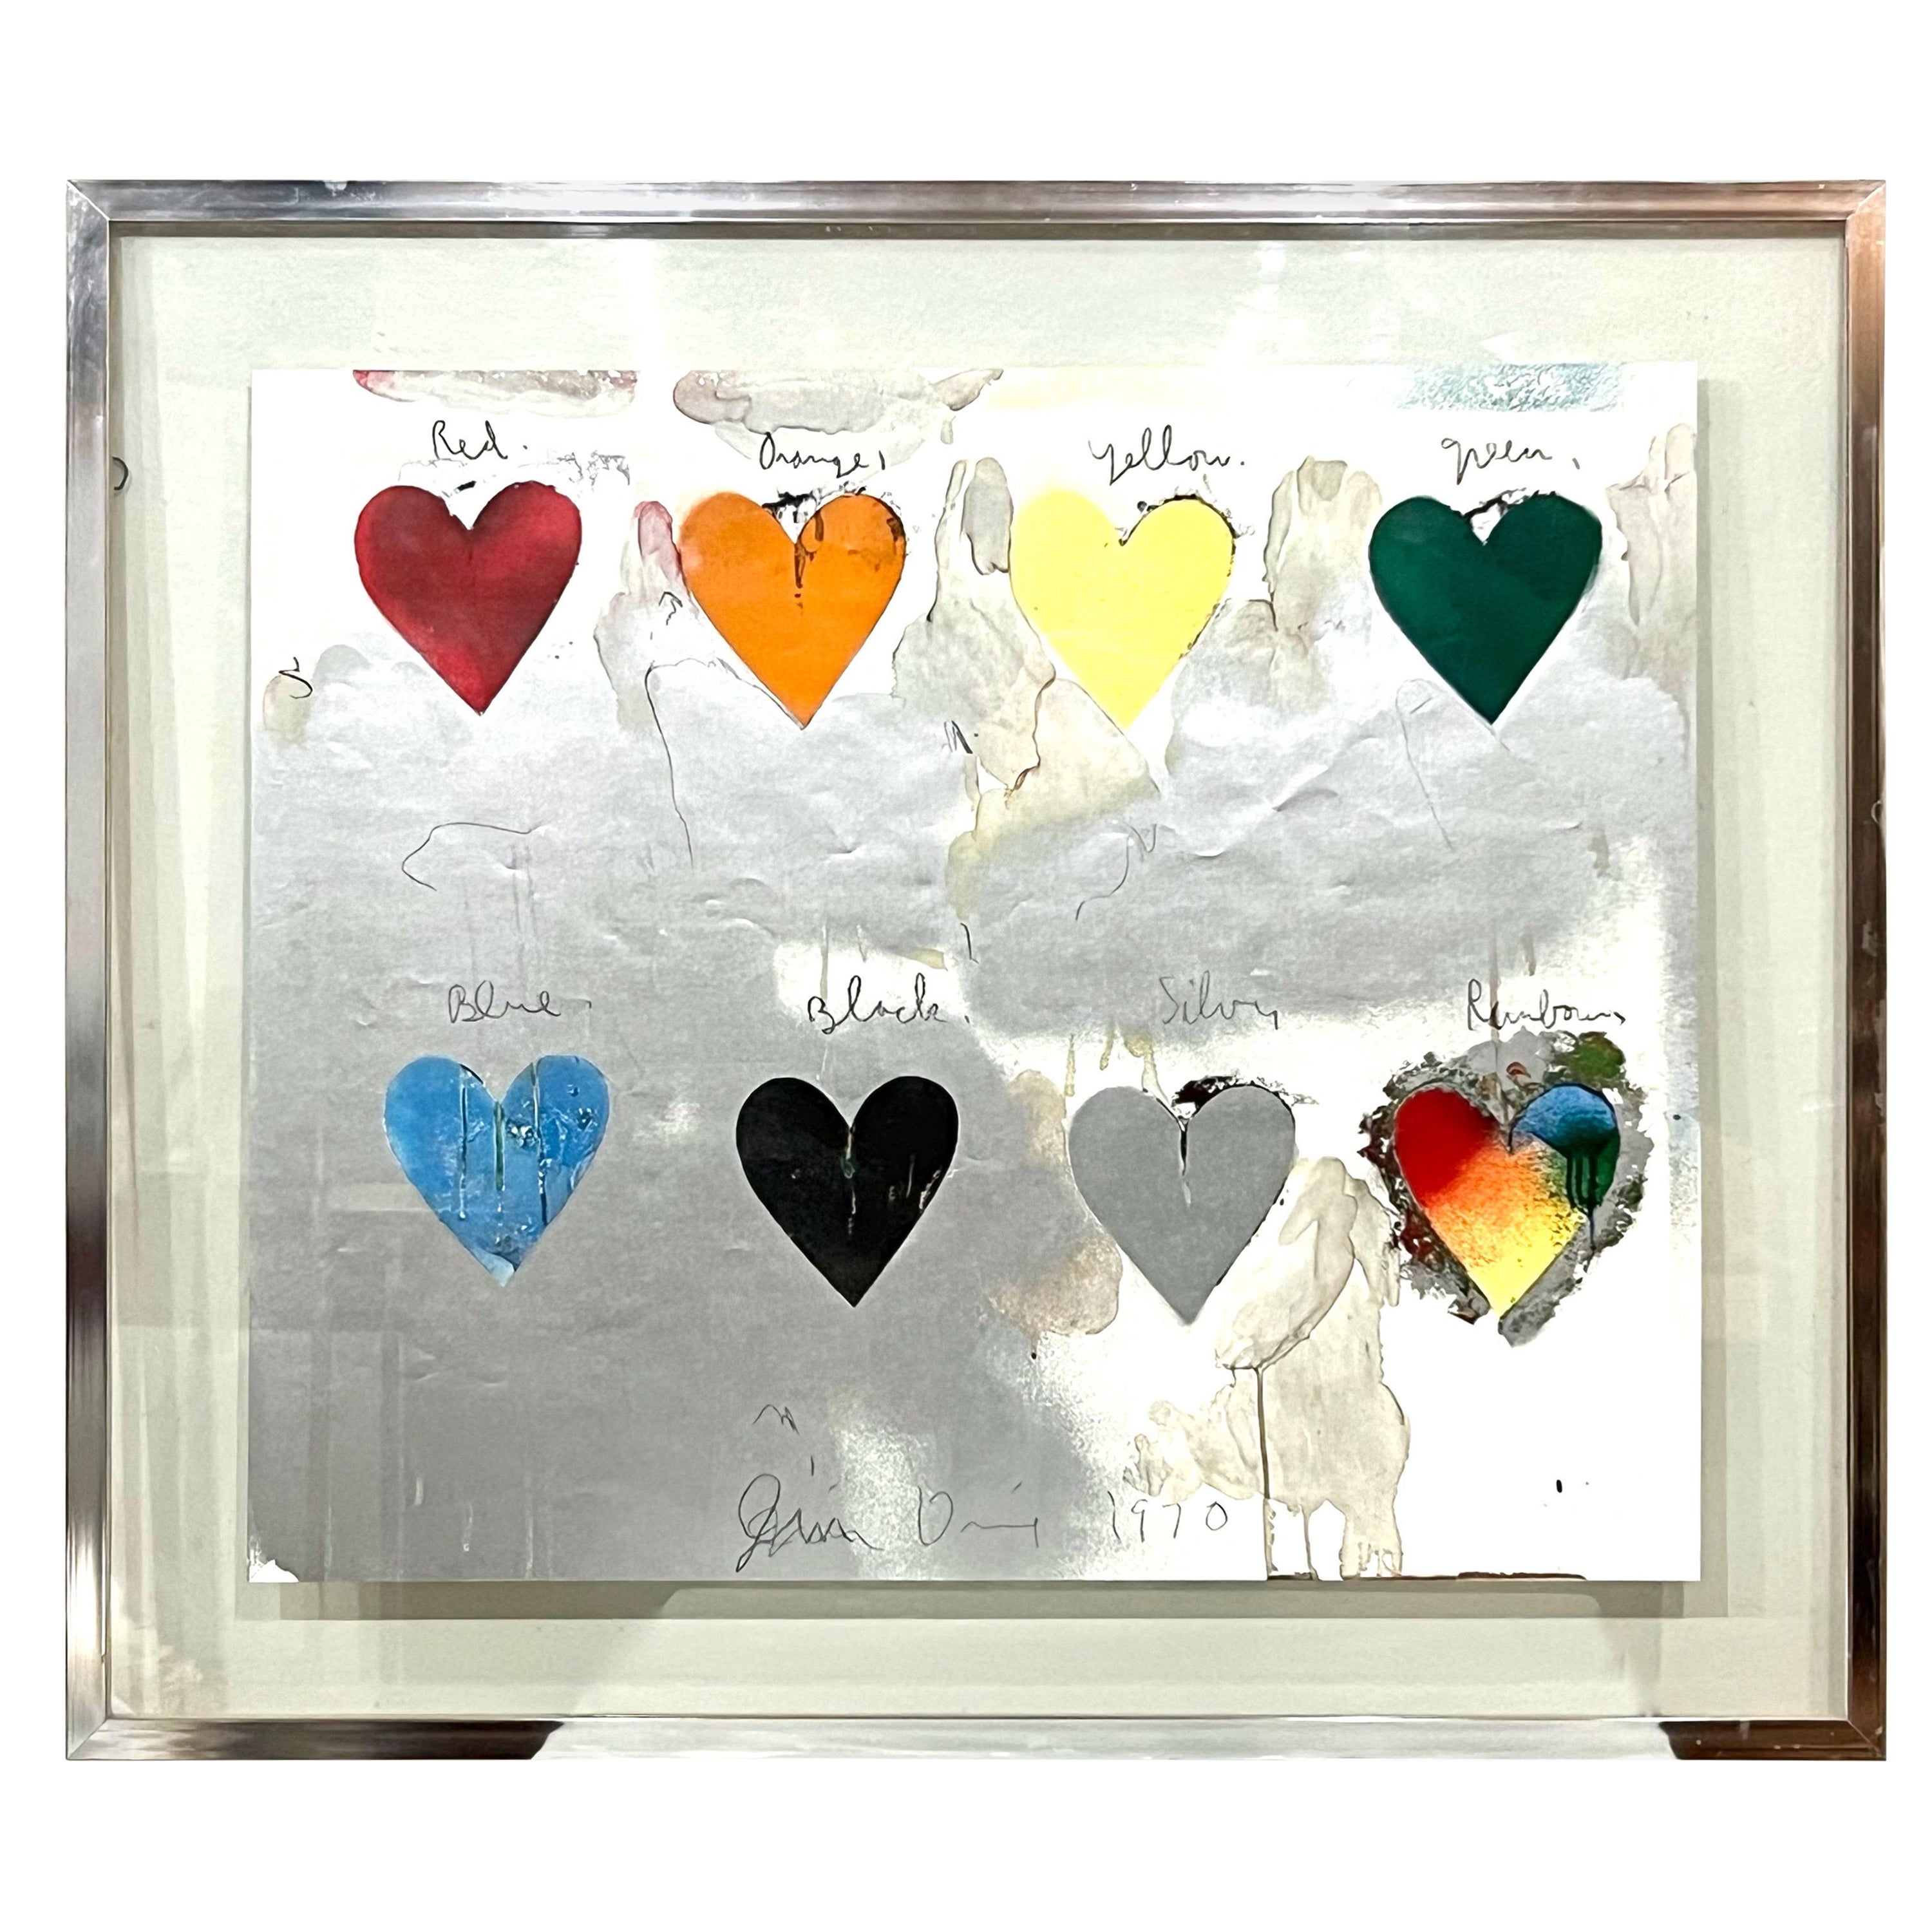 Why did Jim Dine paint hearts?